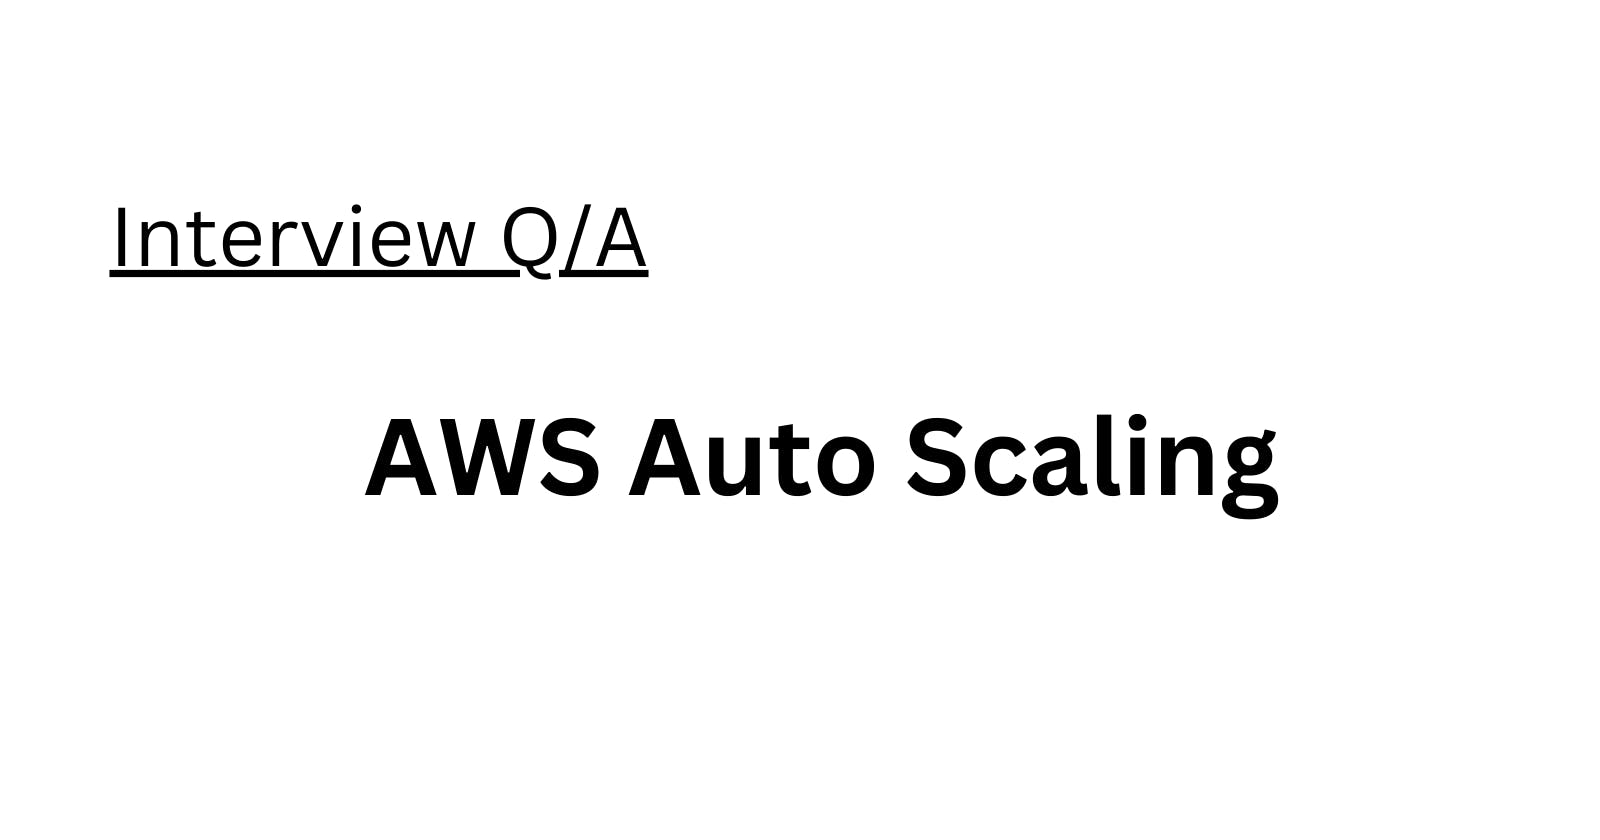 AWS Auto Scaling Interview Q/A